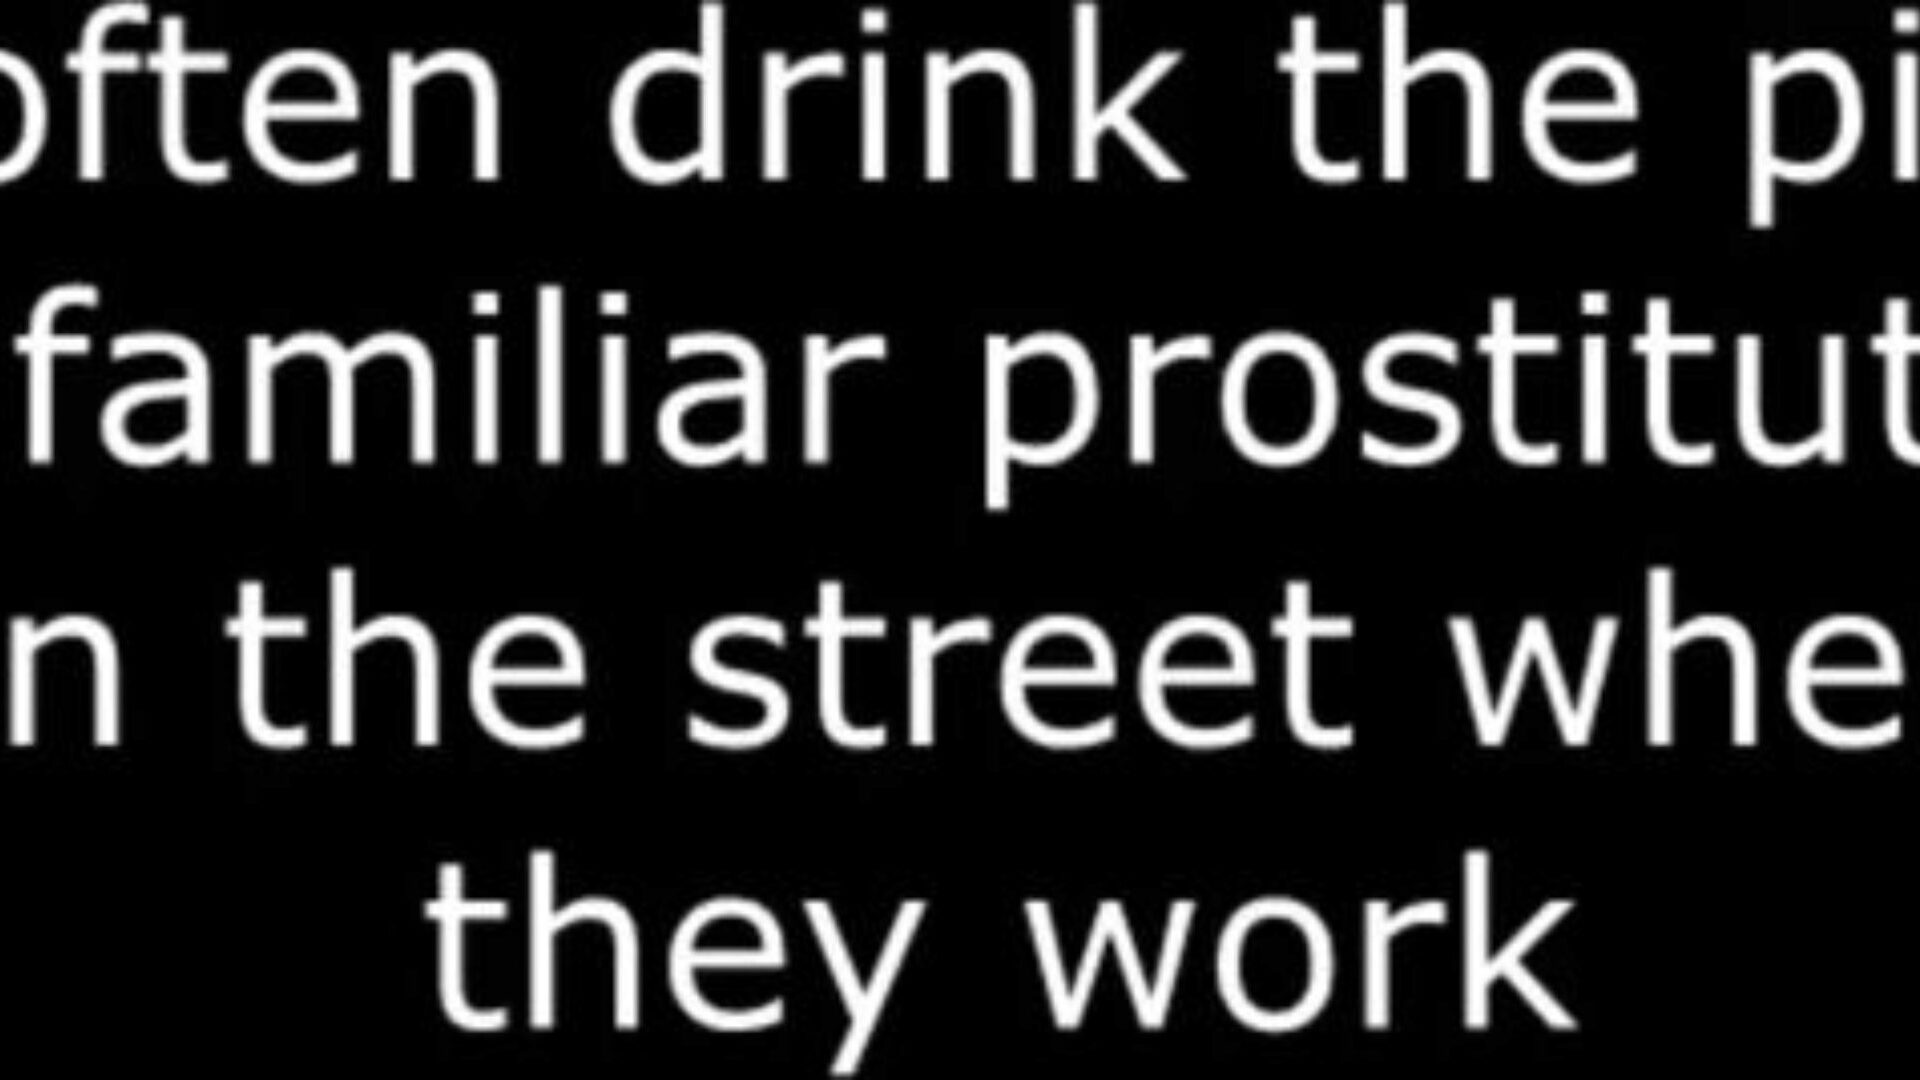 I oftentimes Rink the Void Urine of Familiar Prostitutes on the Street where they Work